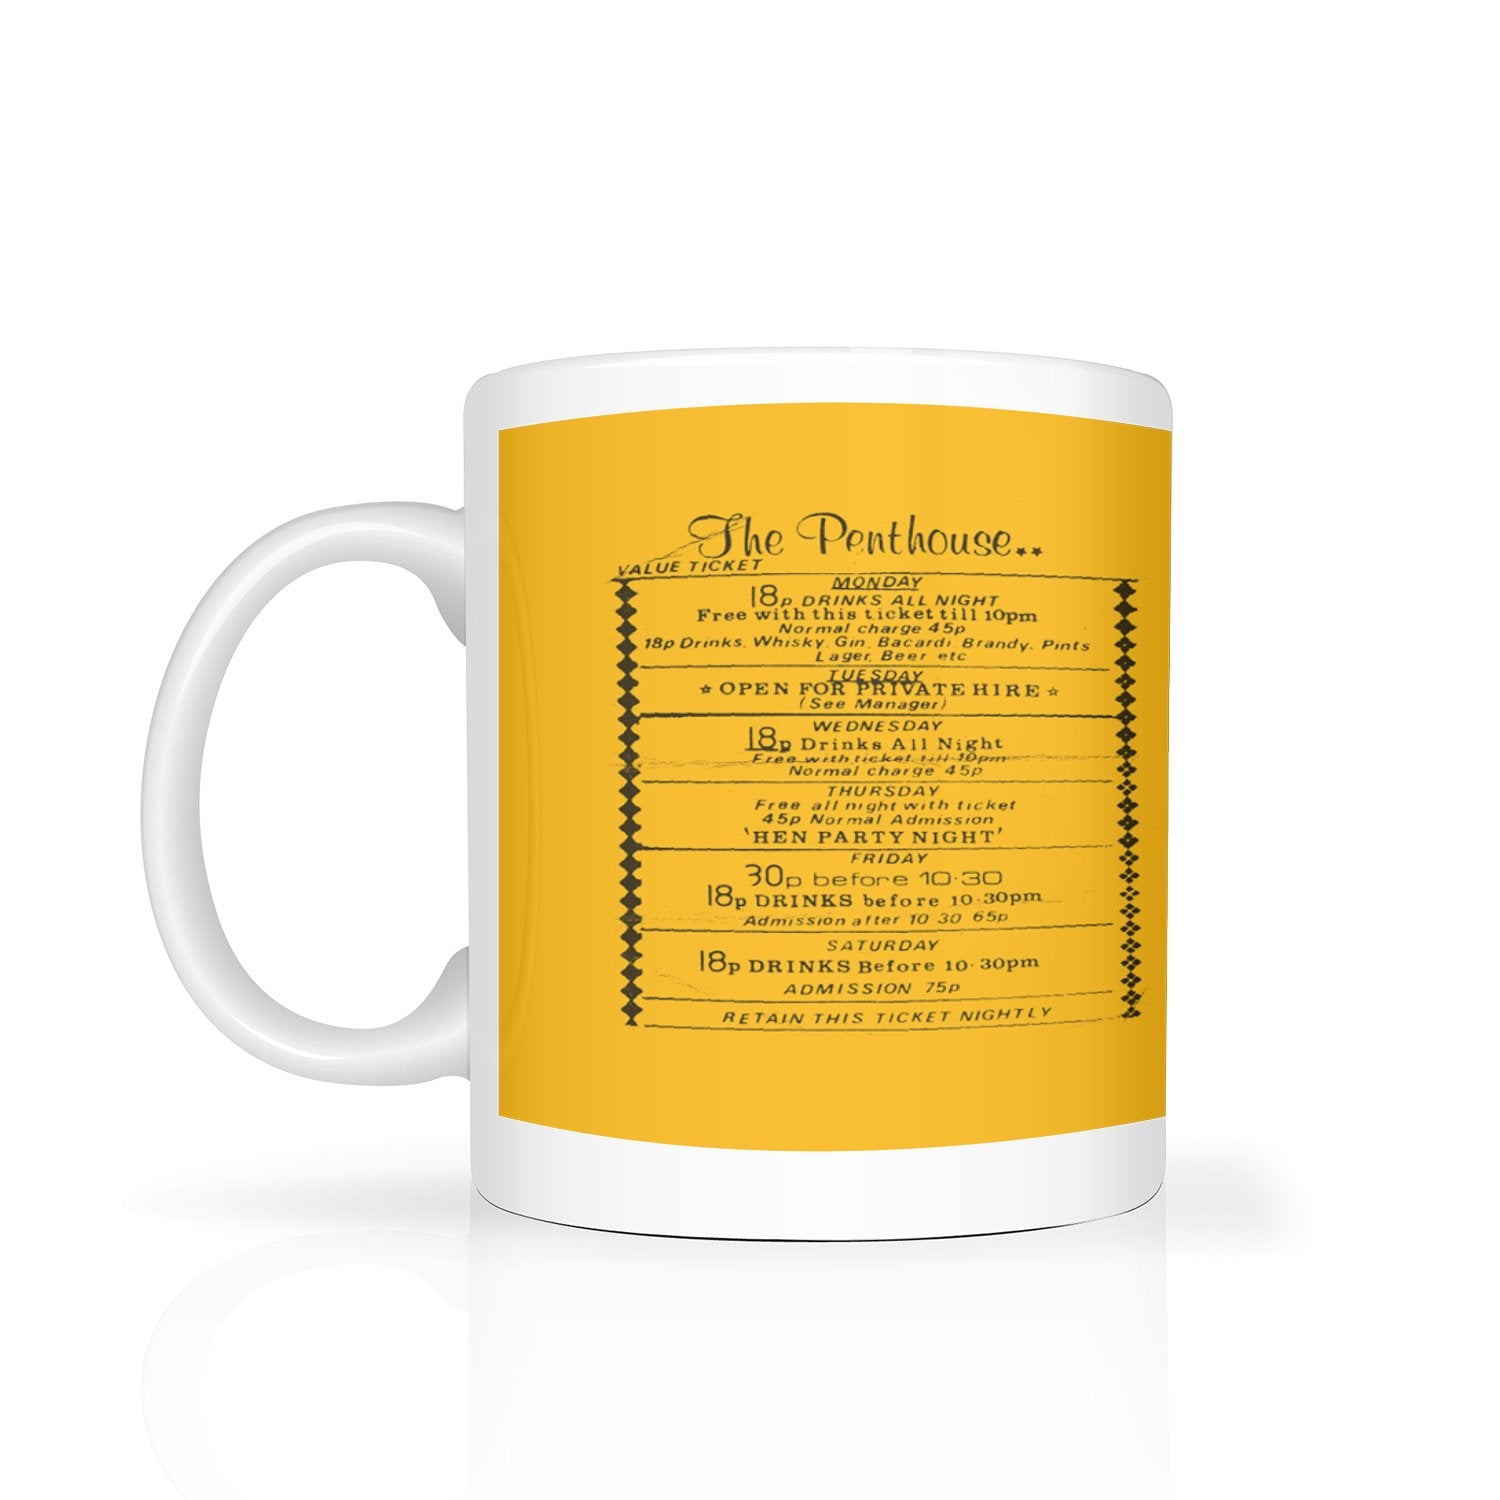 The Penthouse (flyer) mug - Dirty Stop Outs